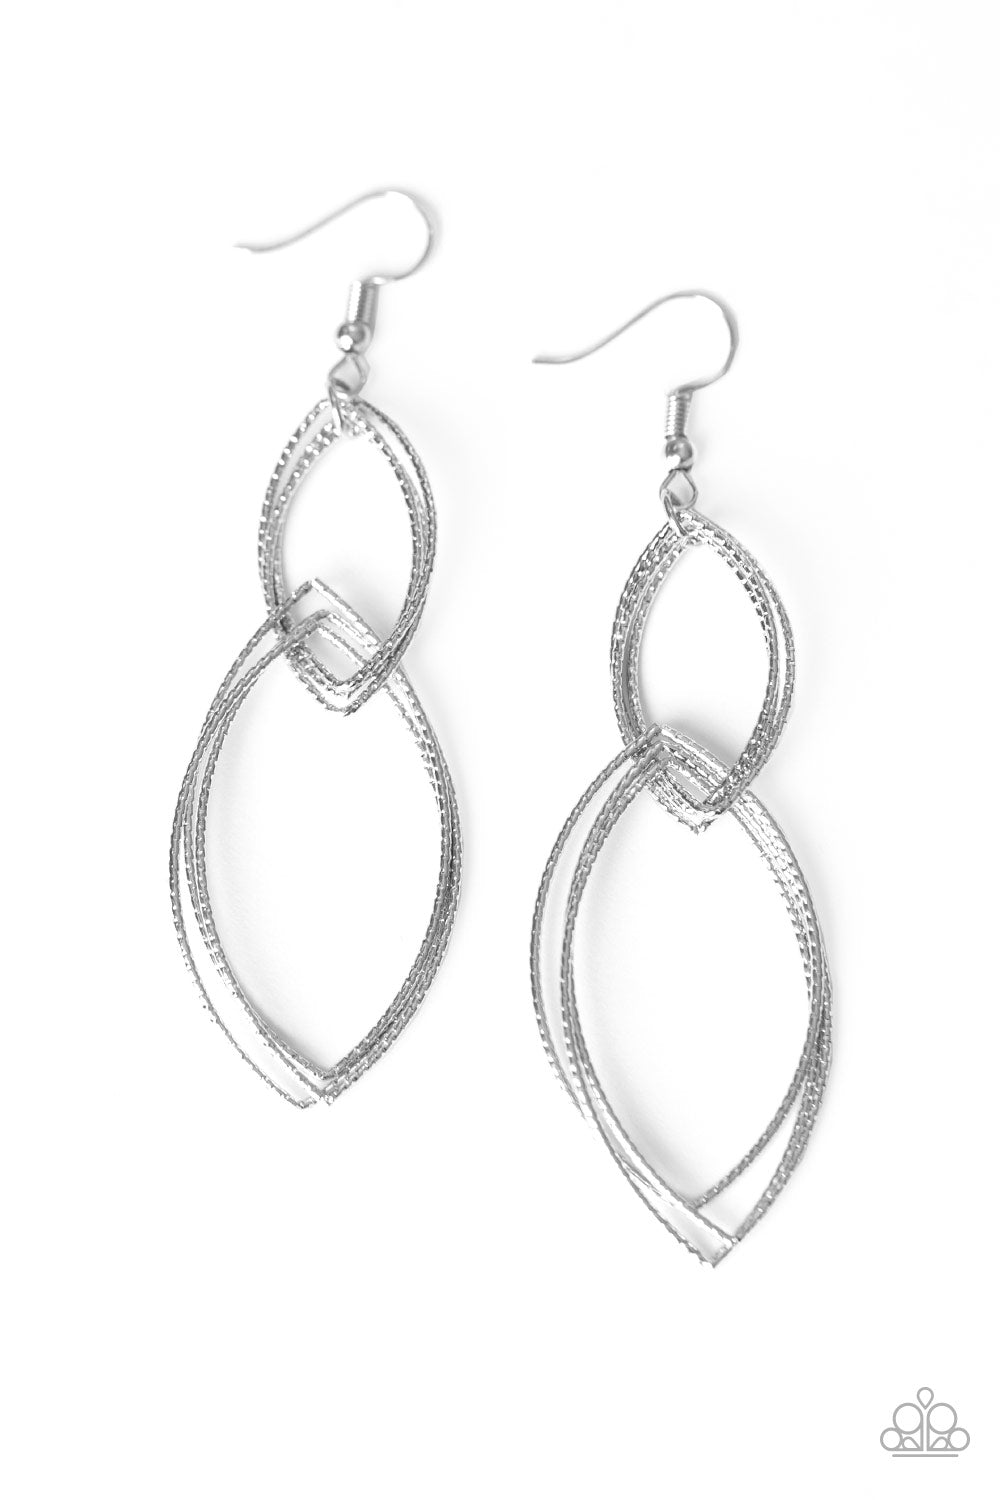 ENDLESS ECO - SILVER DOUBLE MARQUISE WIRE HOOP EARRINGS